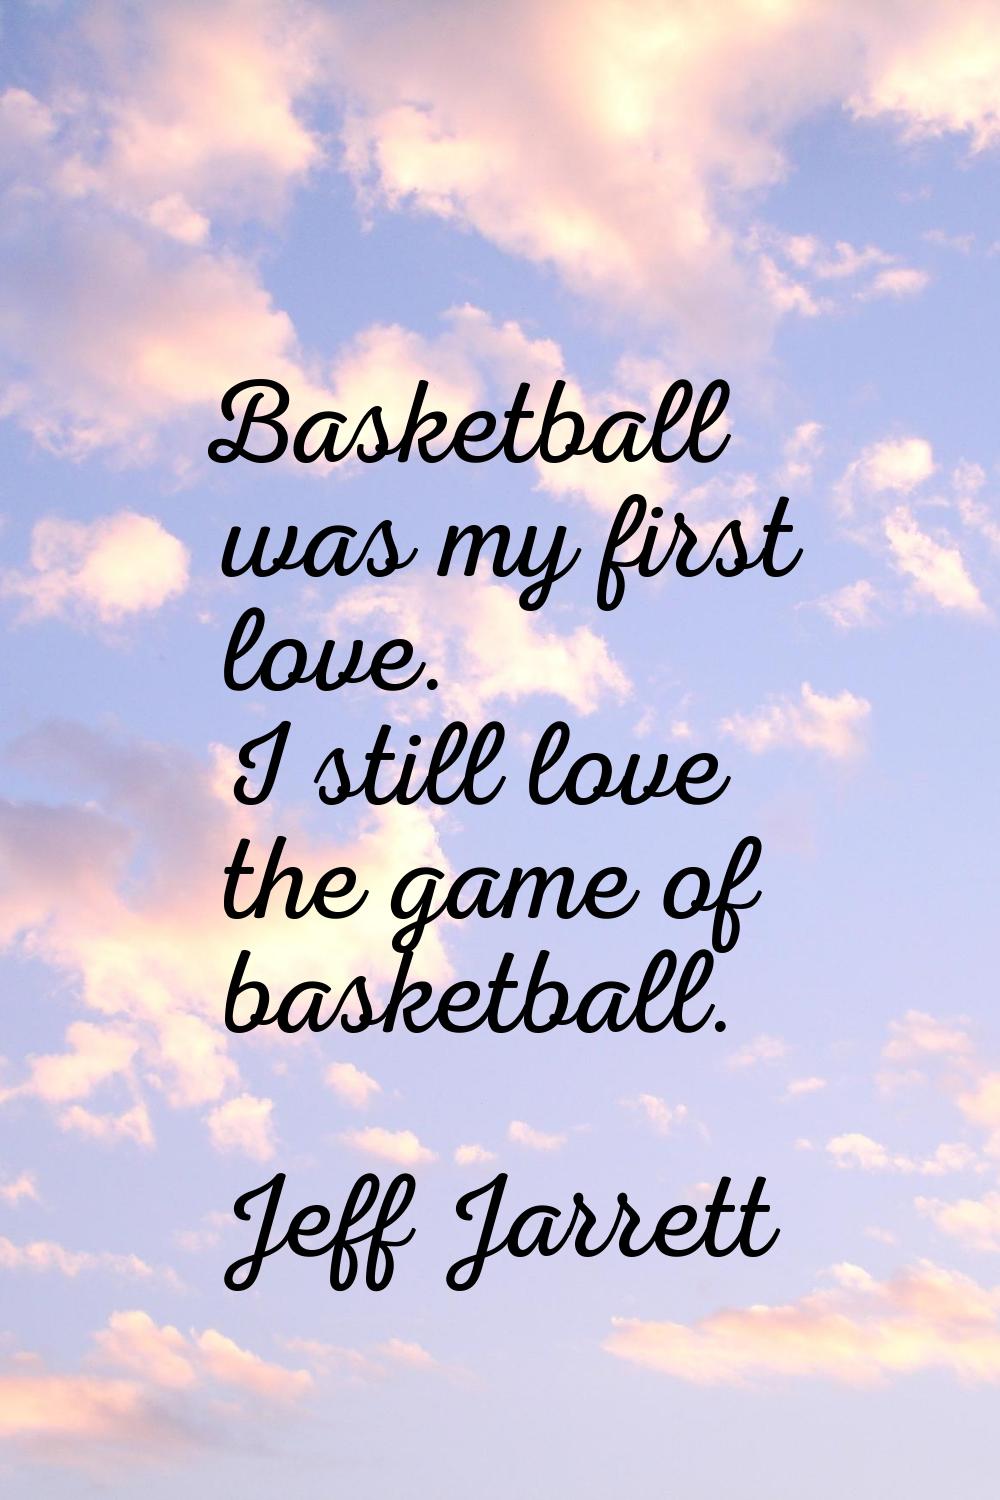 Basketball was my first love. I still love the game of basketball.